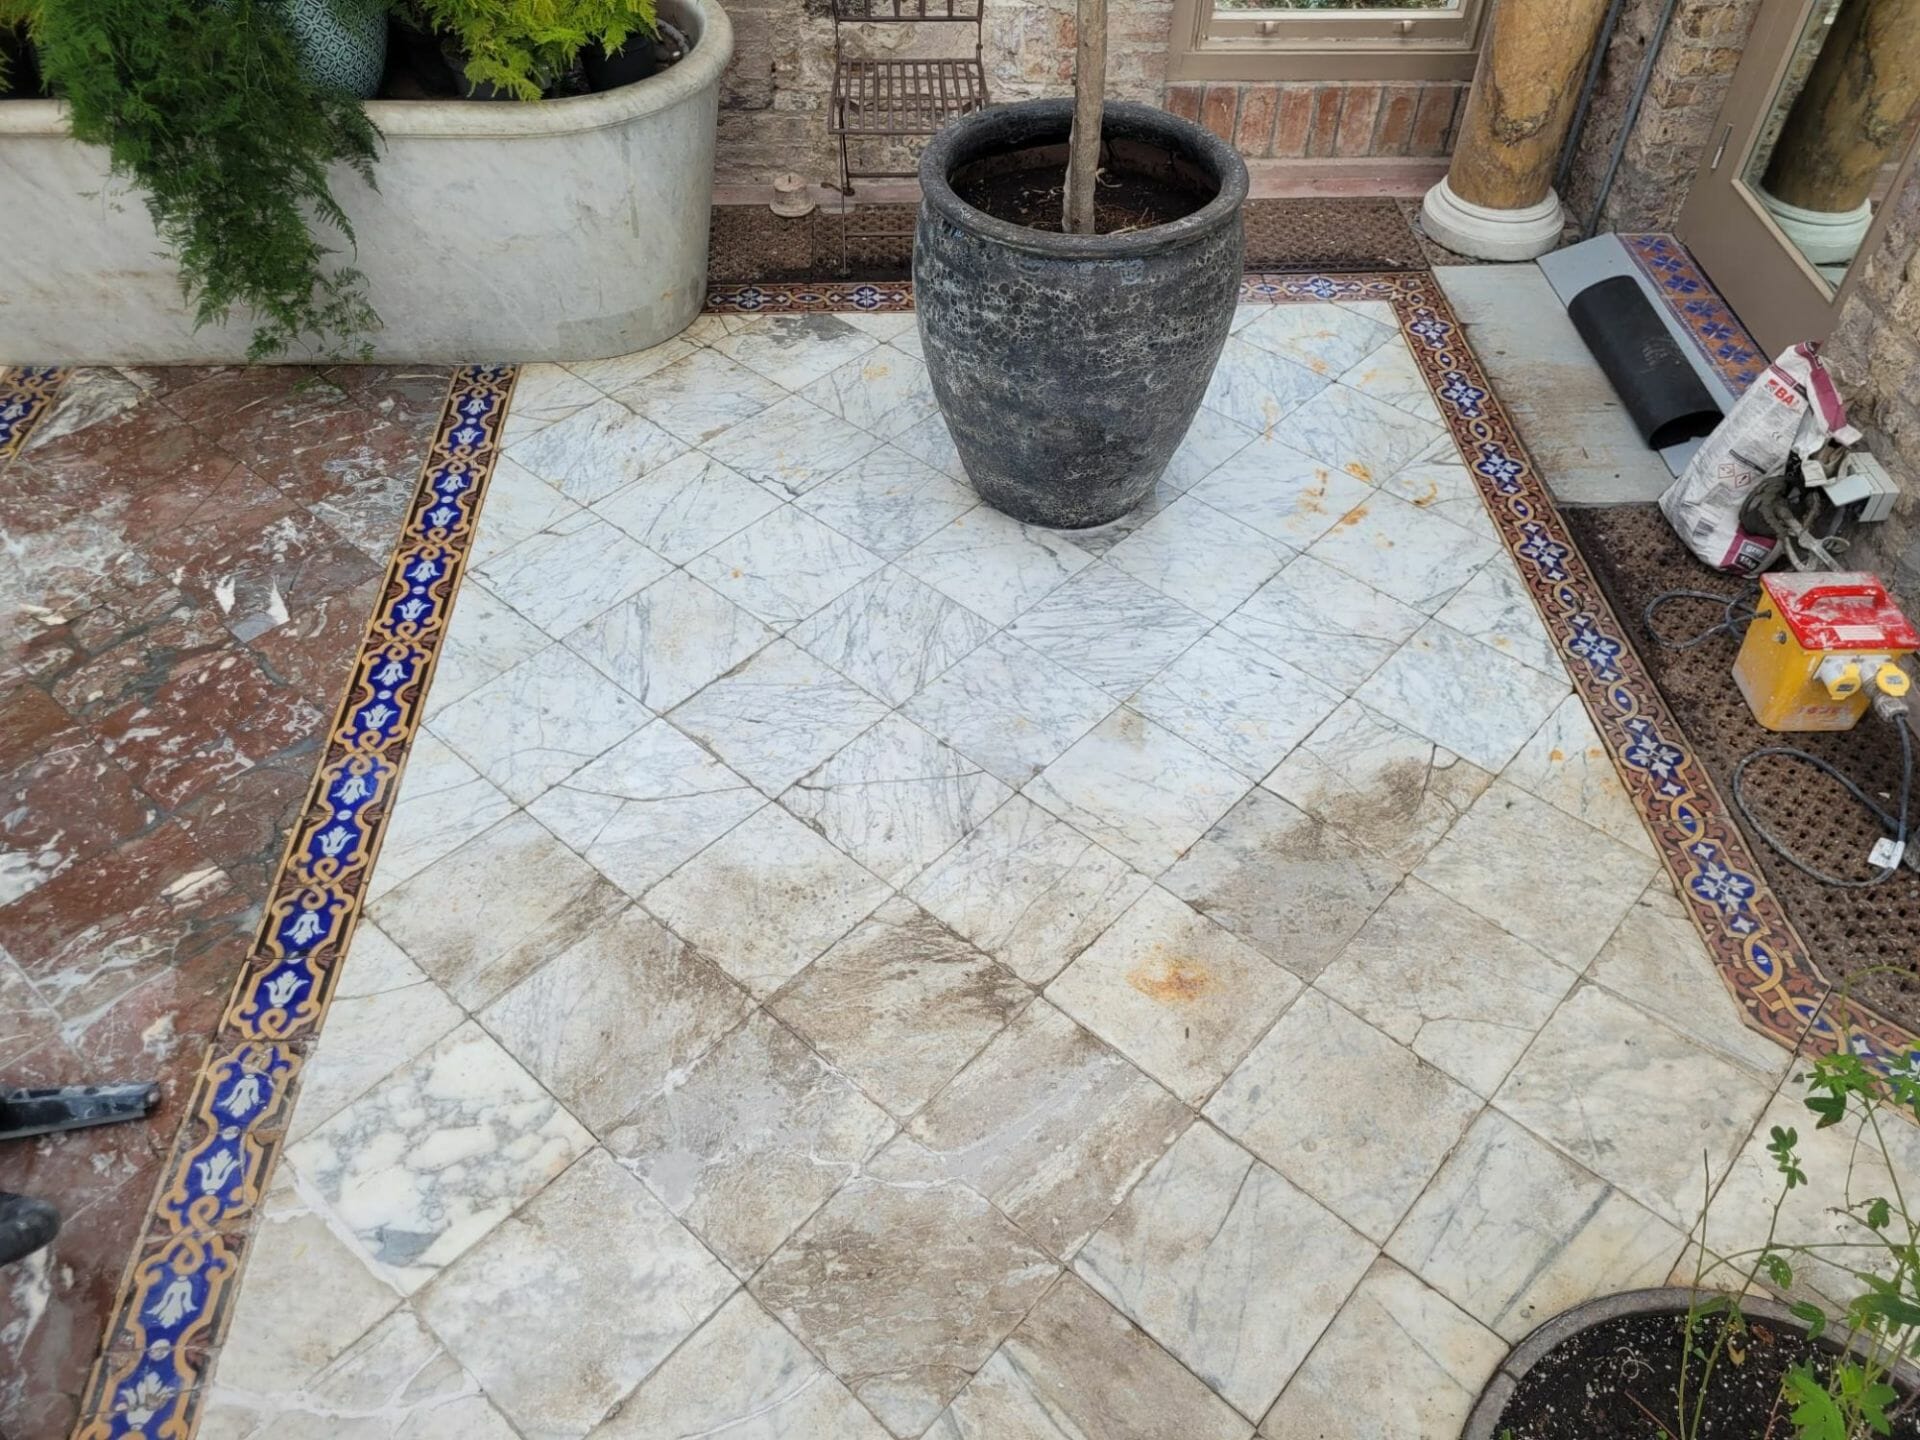 Heavily stained marble stone tiles